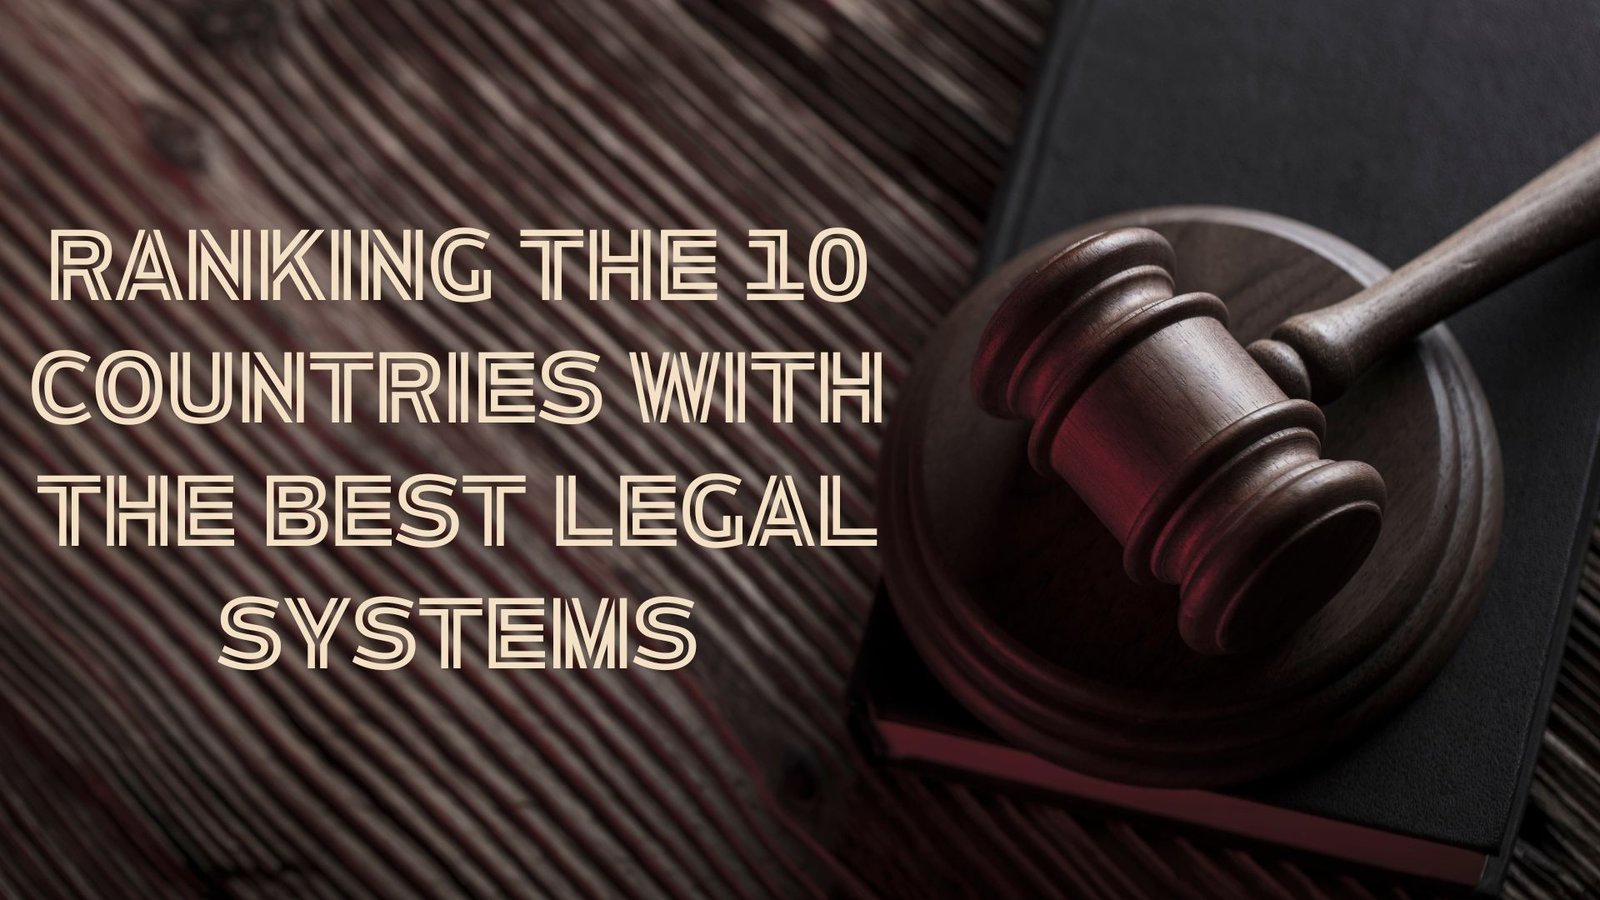 Ranking the 10 Countries With the Best Legal Systems, Lawforeverything